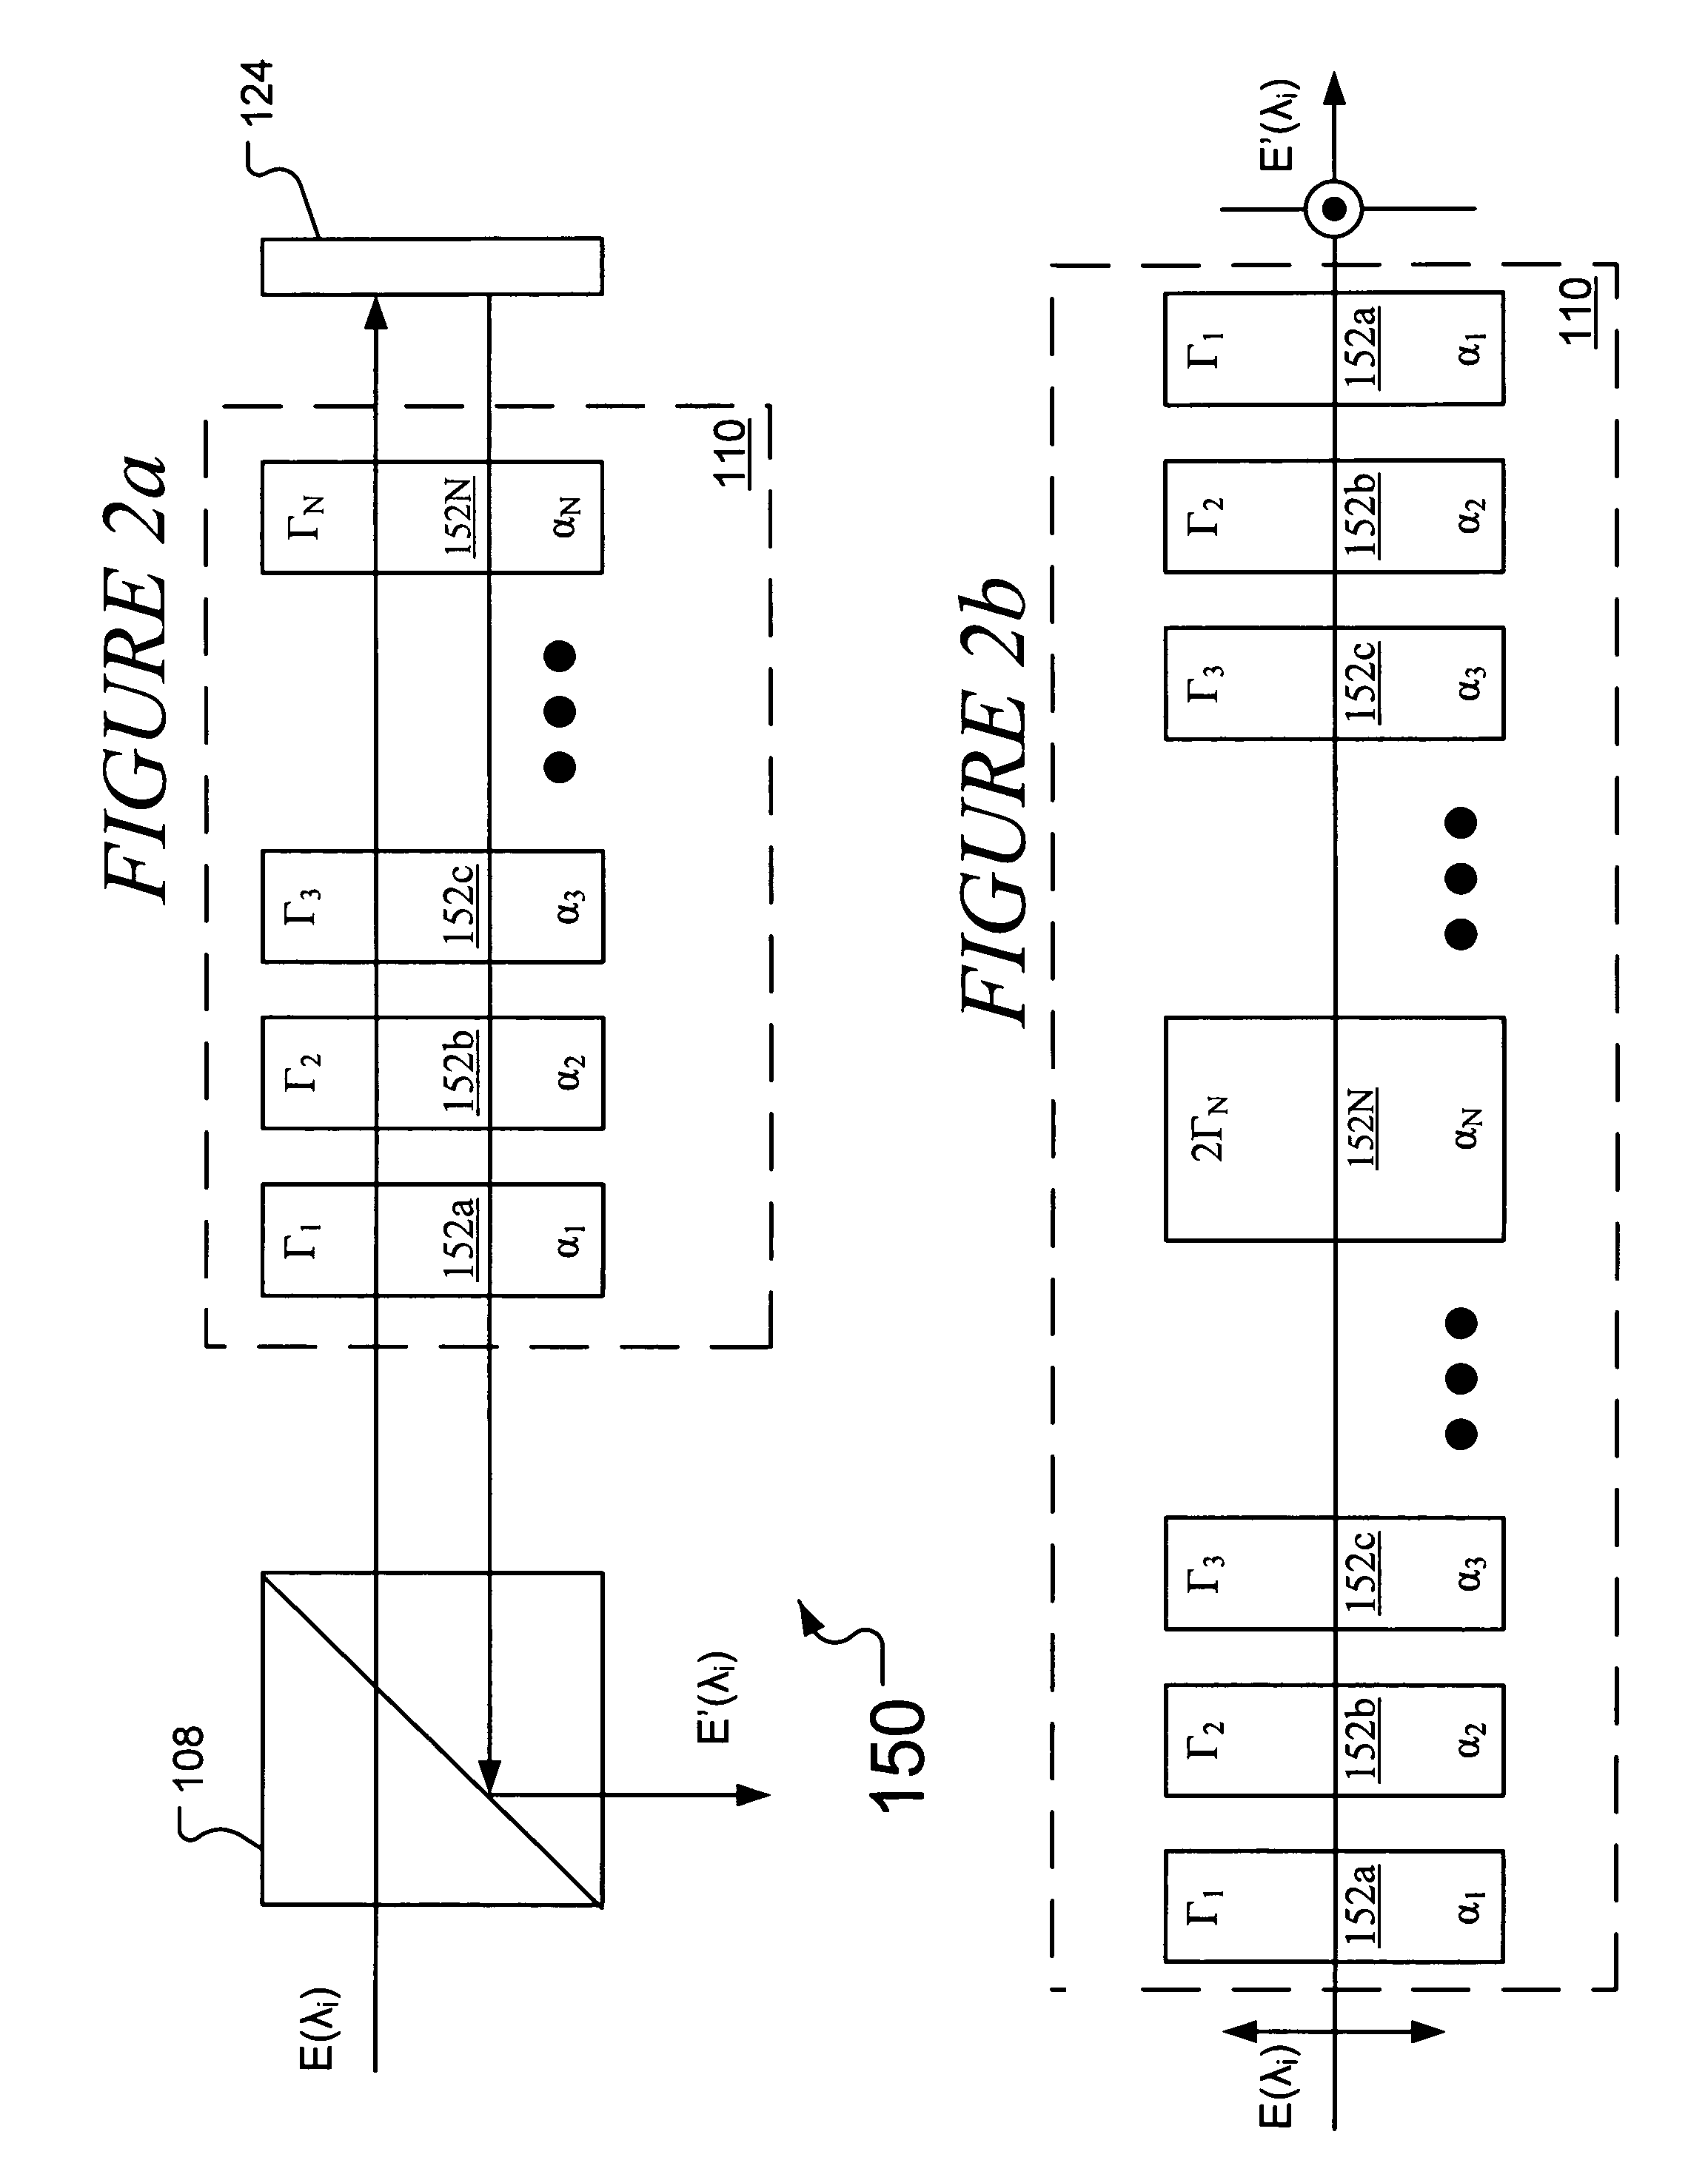 Achromatic polarization devices for optical disc pickup heads